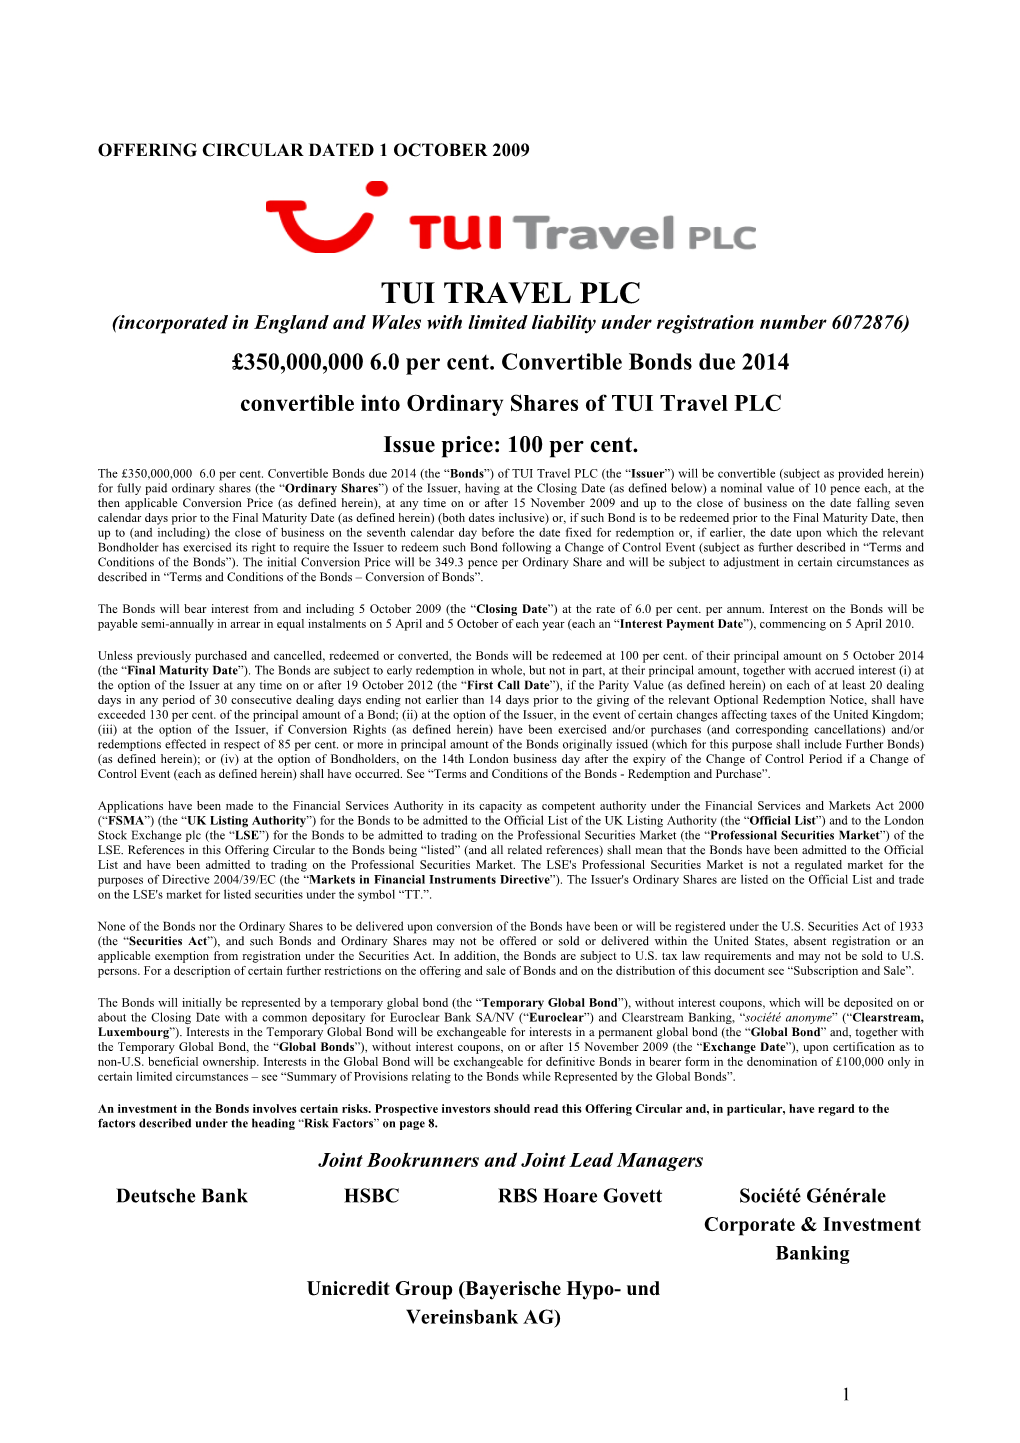 TUI TRAVEL PLC (Incorporated in England and Wales with Limited Liability Under Registration Number 6072876) £350,000,000 6.0 Per Cent